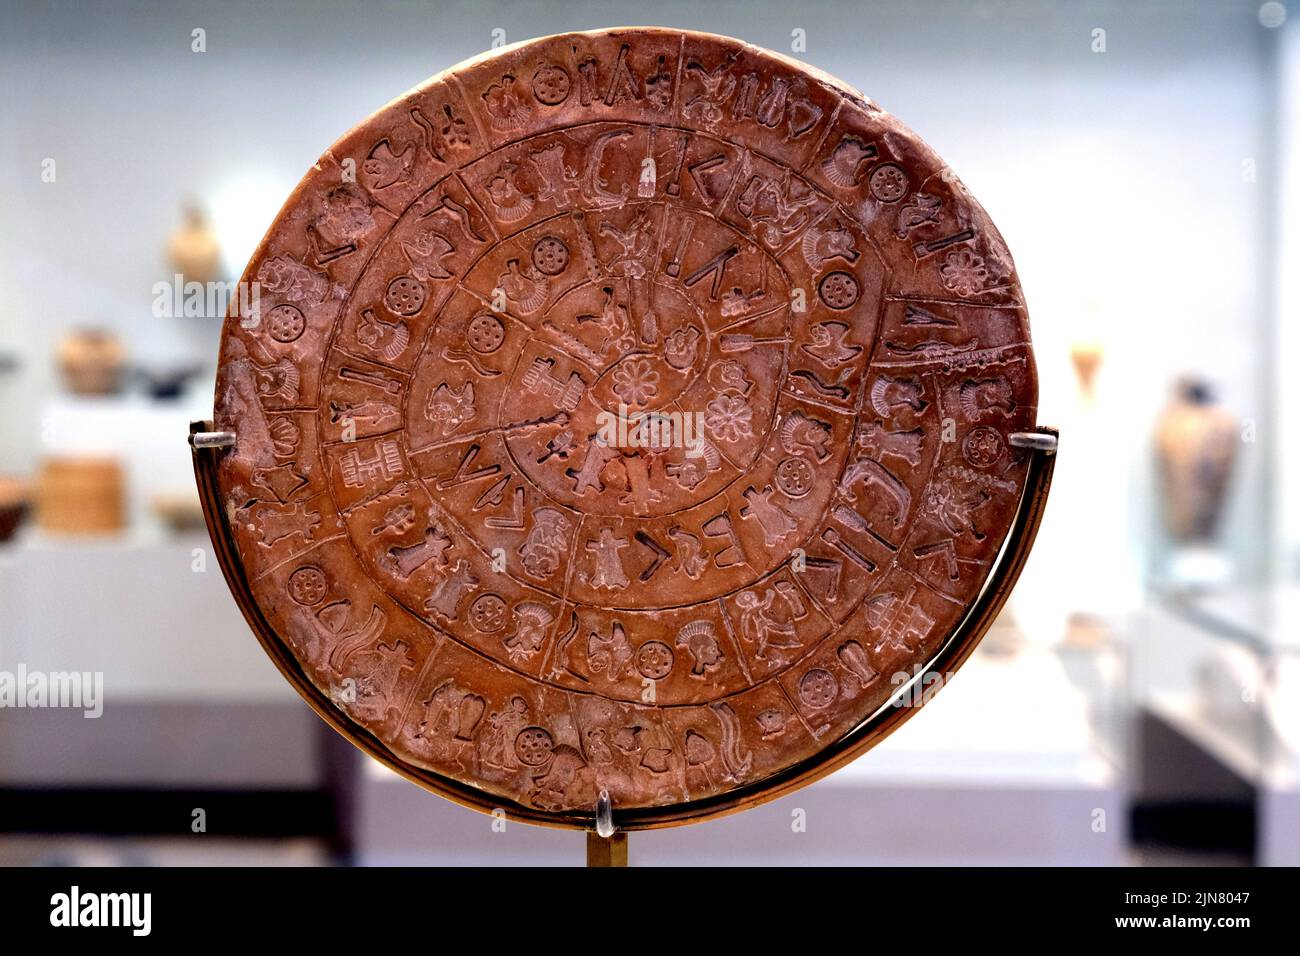 The Phaistos Disc in the Heraklion Archaeological Museum in Crete Greece Stock Photo